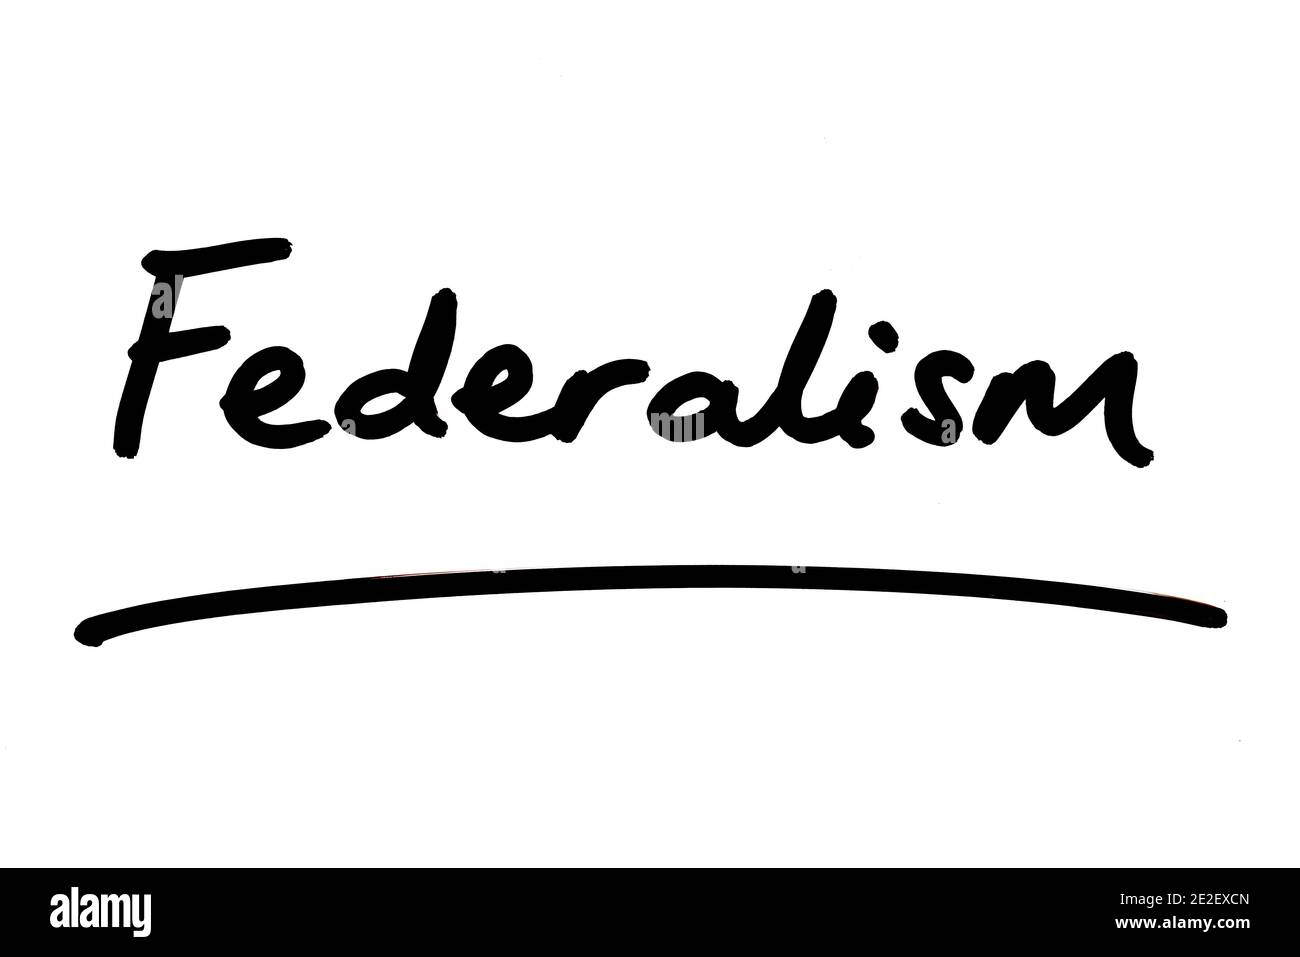 The word Federalism handwritten on a white background. Stock Photo